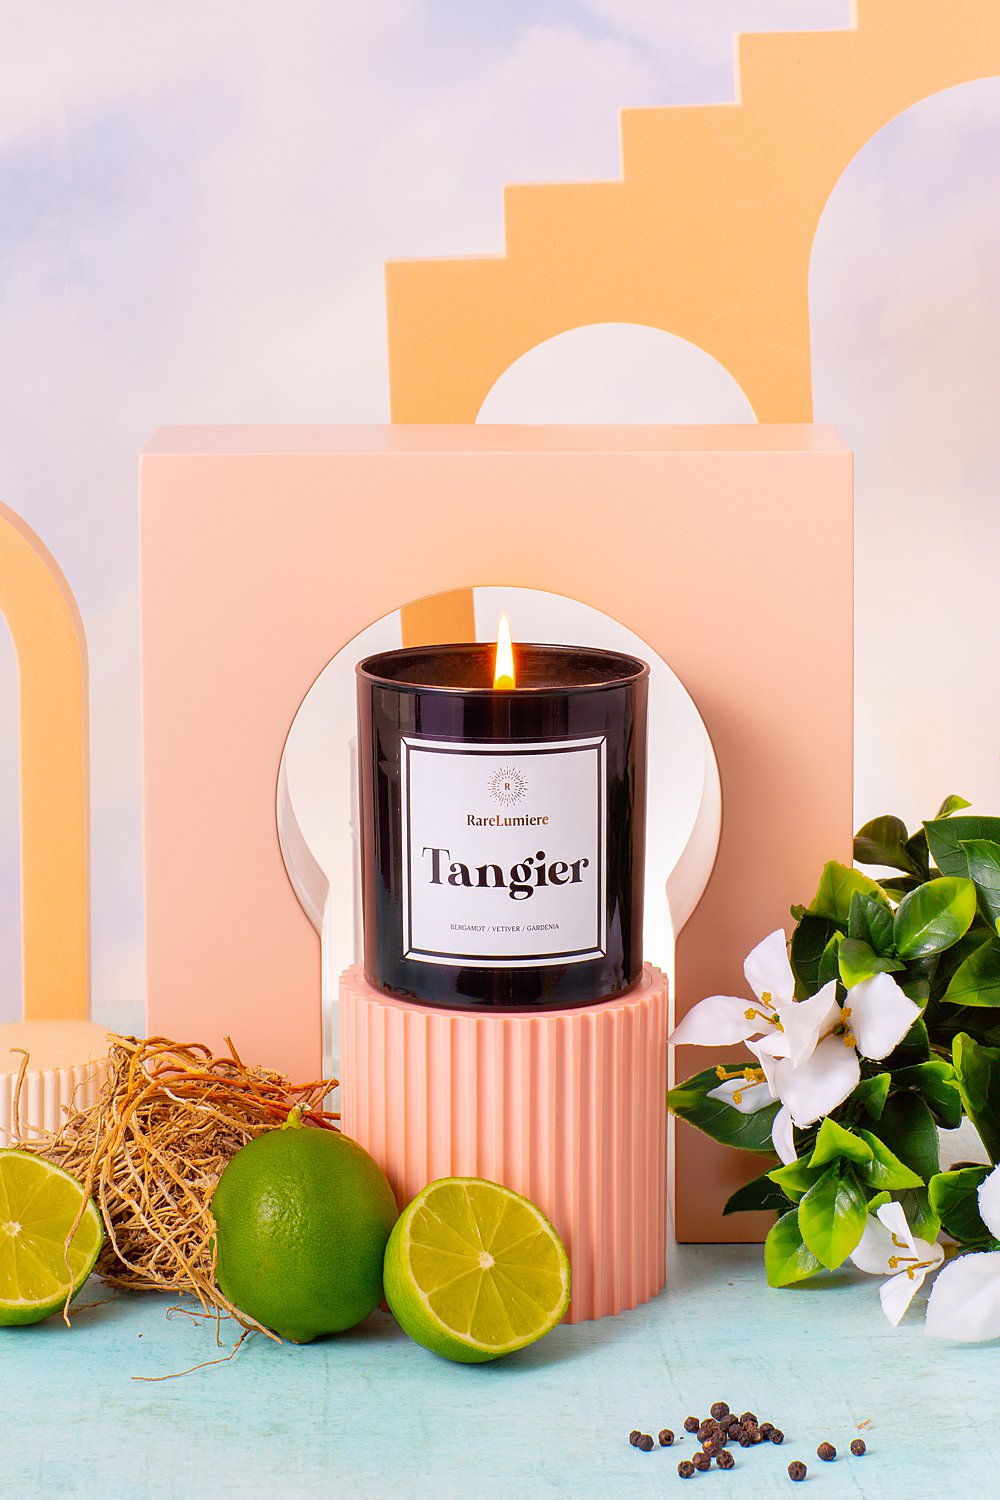 Colourful pretty content creation for Rare Lumiere candles. Styled beauty product stills photography by Marianne Taylor.